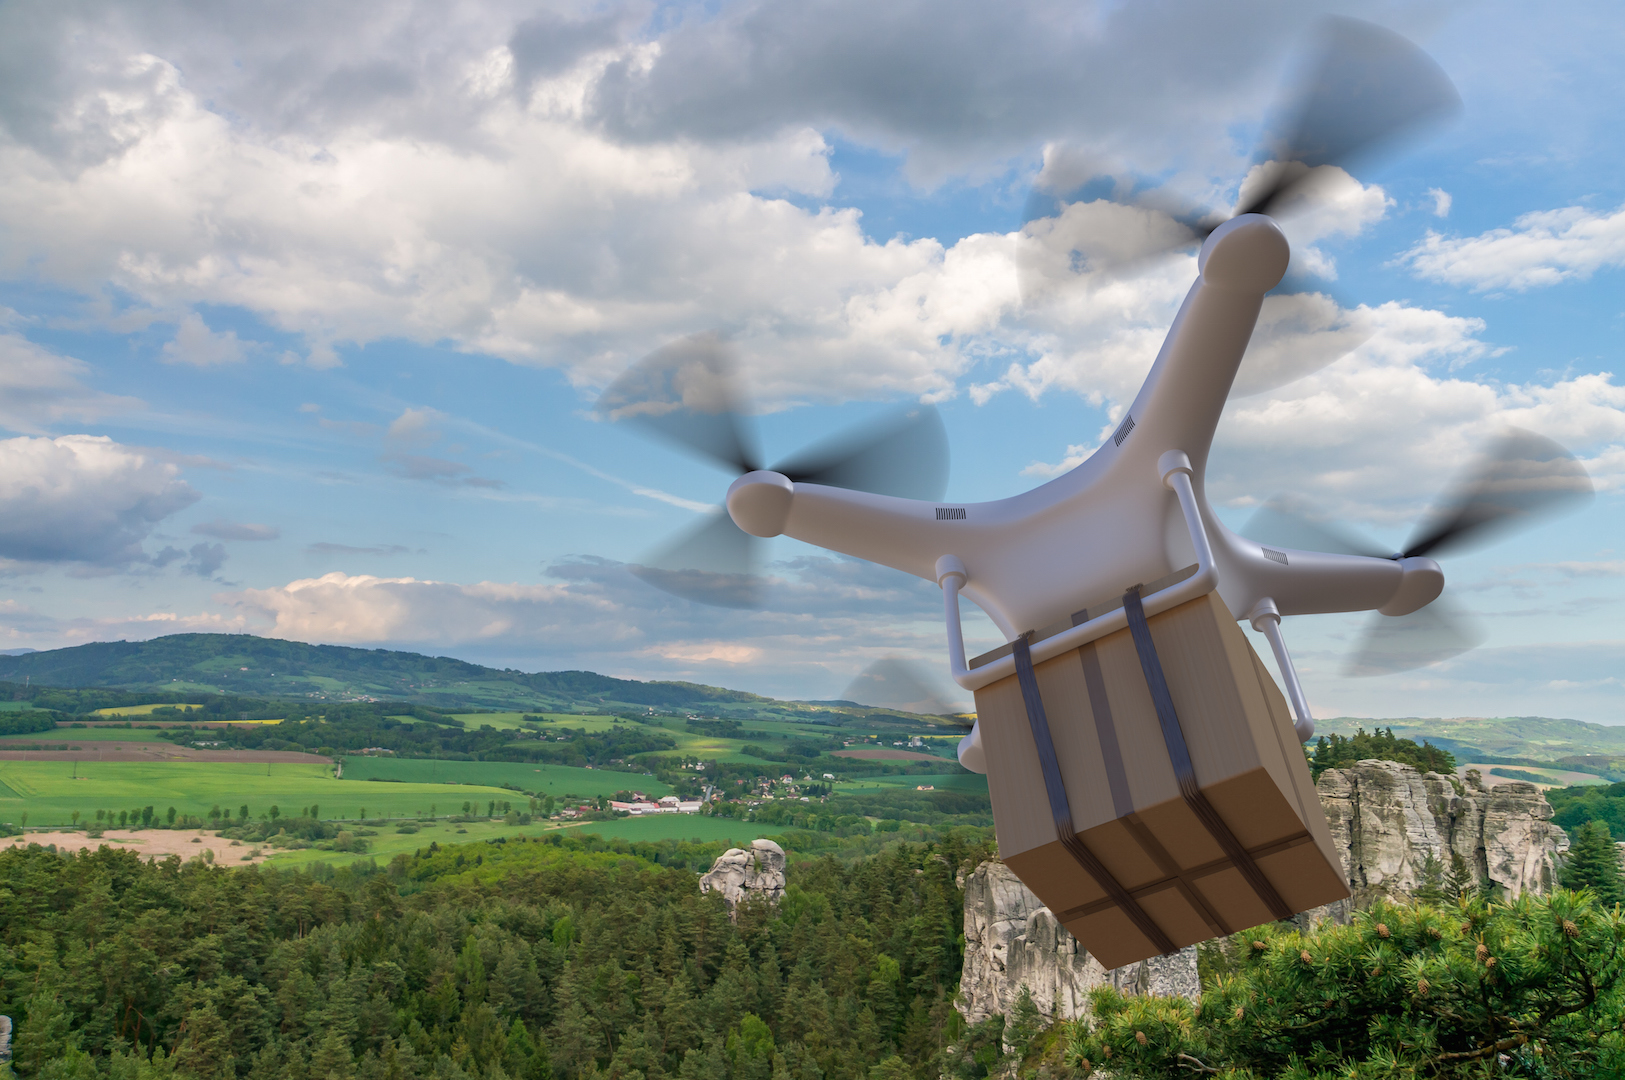 drone delivering a package